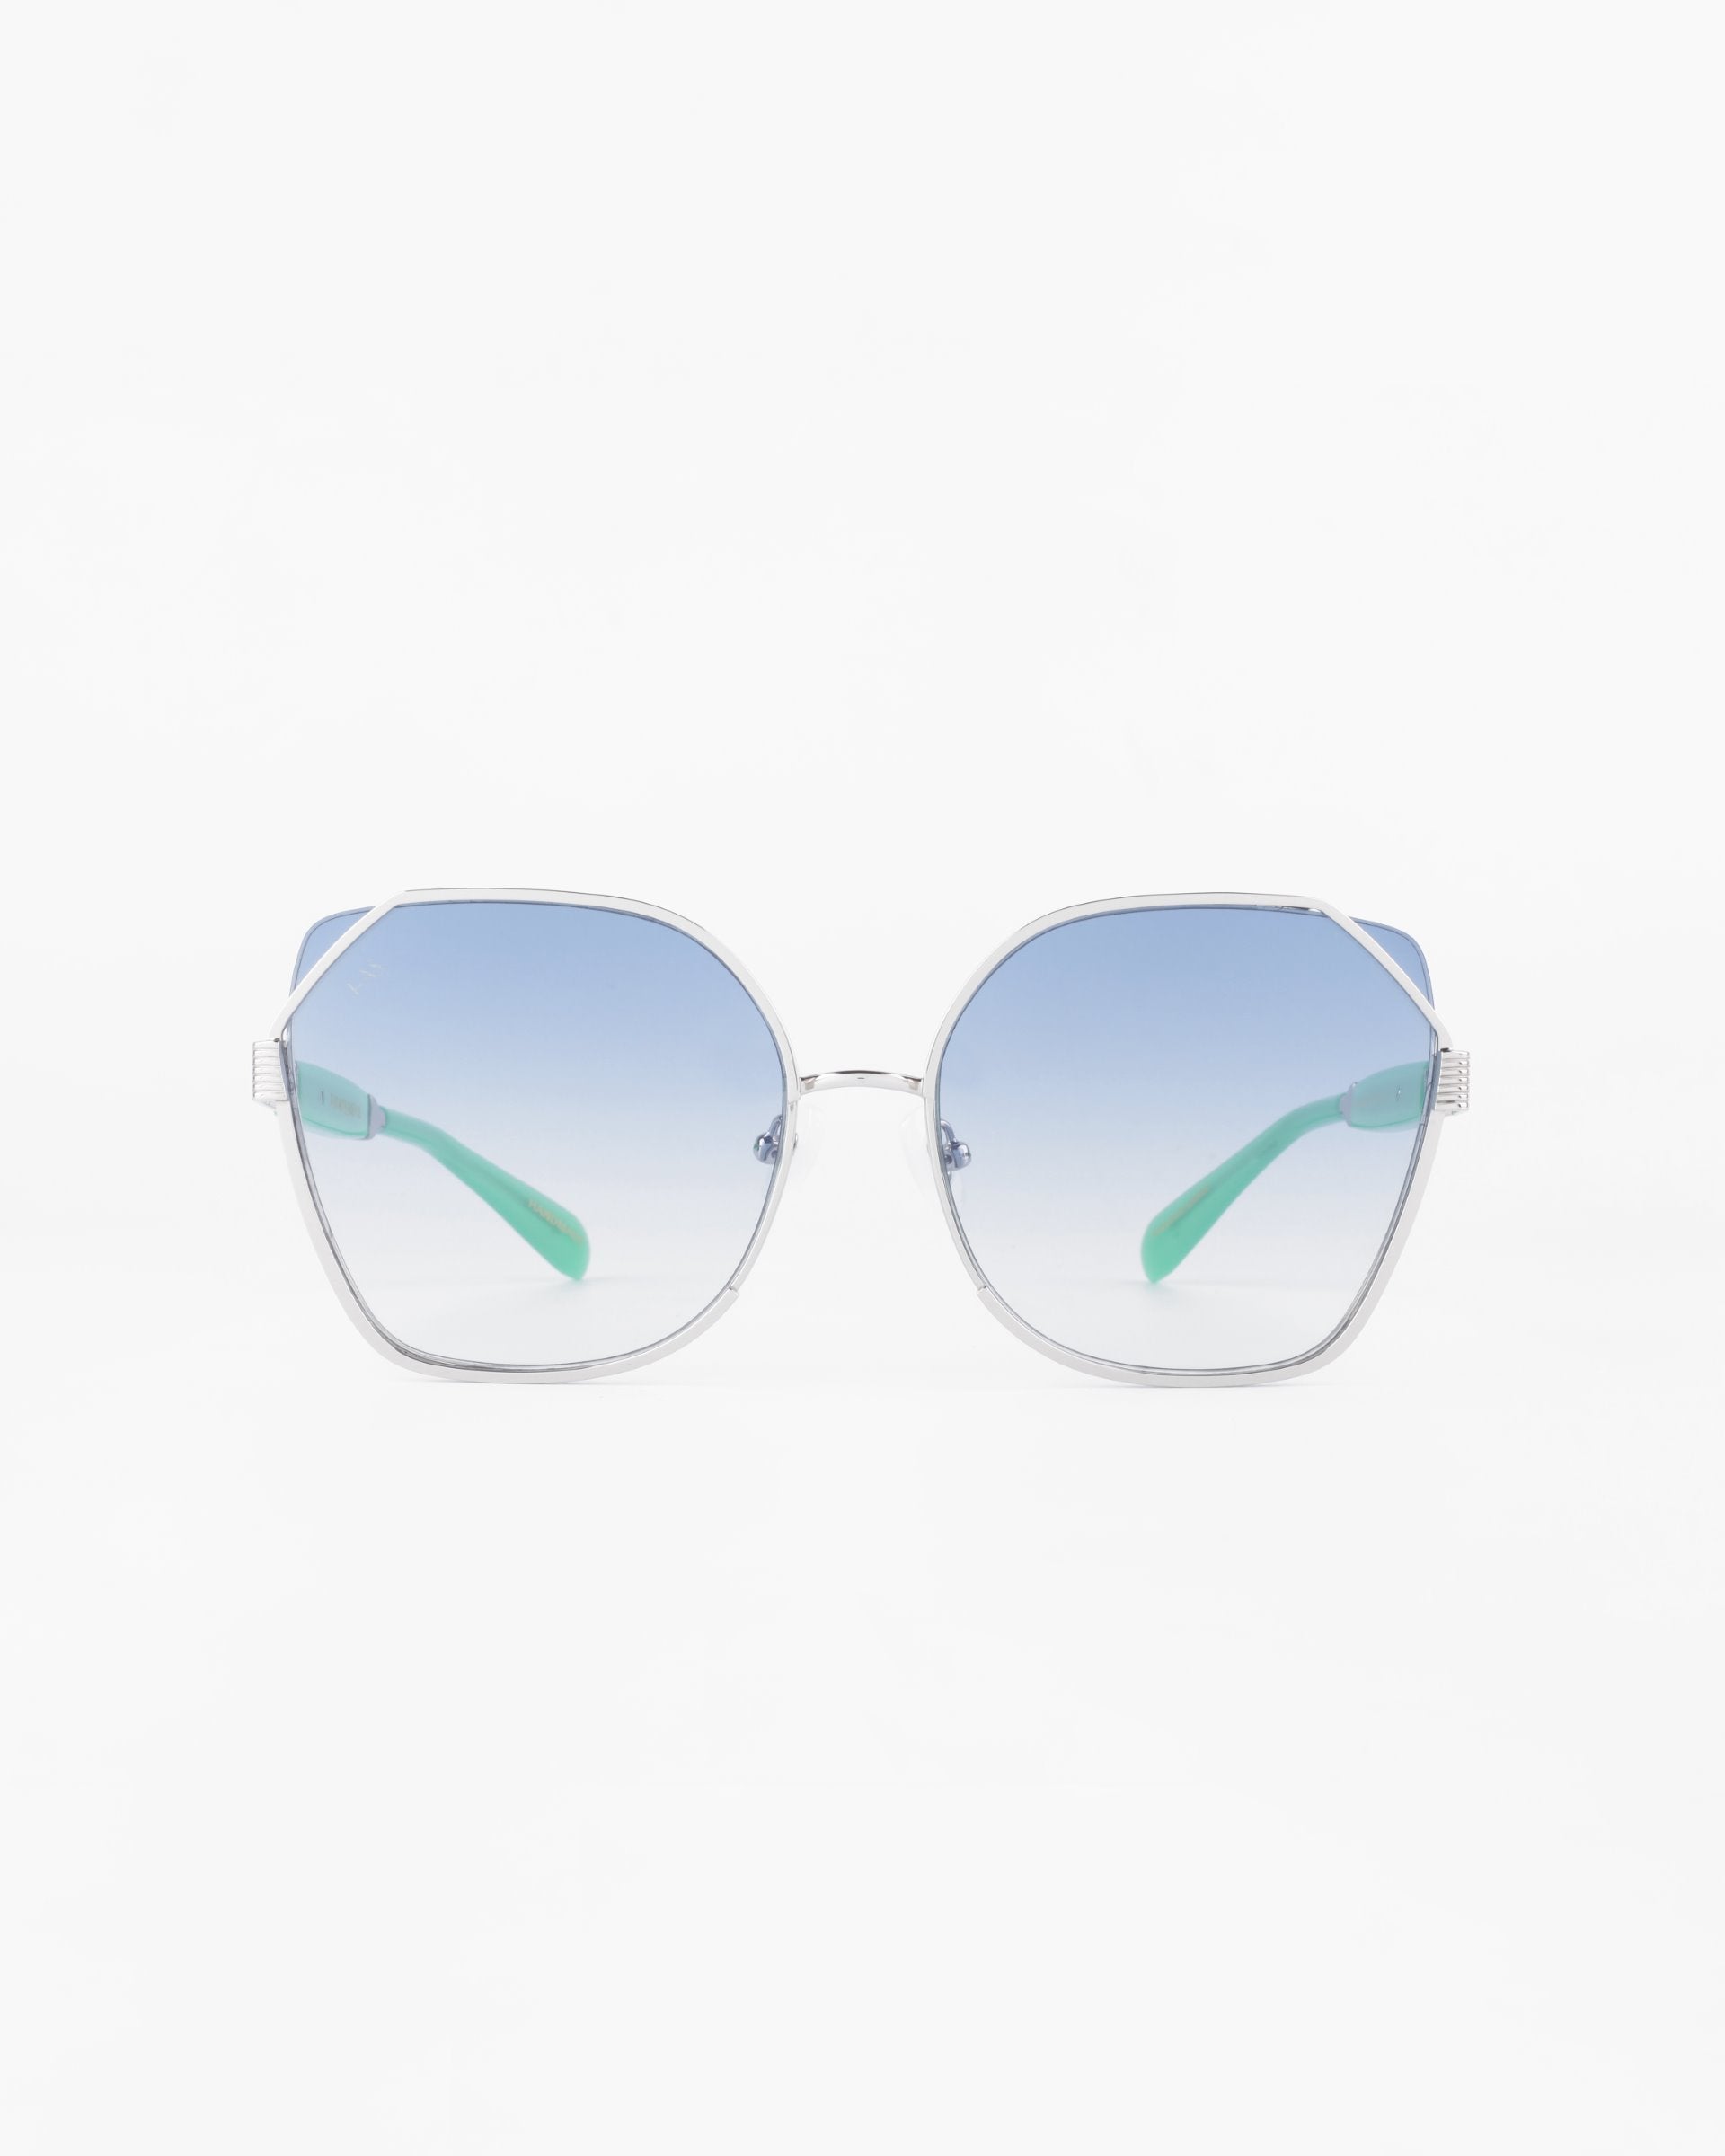 A pair of stylish sunglasses with large, hexagonal frames featuring a gold-plated stainless steel finish. The ultra-lightweight nylon lenses are gradient blue, transitioning from a darker hue at the top to a lighter shade at the bottom. The arms have a modern, sleek design with light green accents and provide 100% UVA & UVB protection. Introducing Montage by For Art's Sake®.